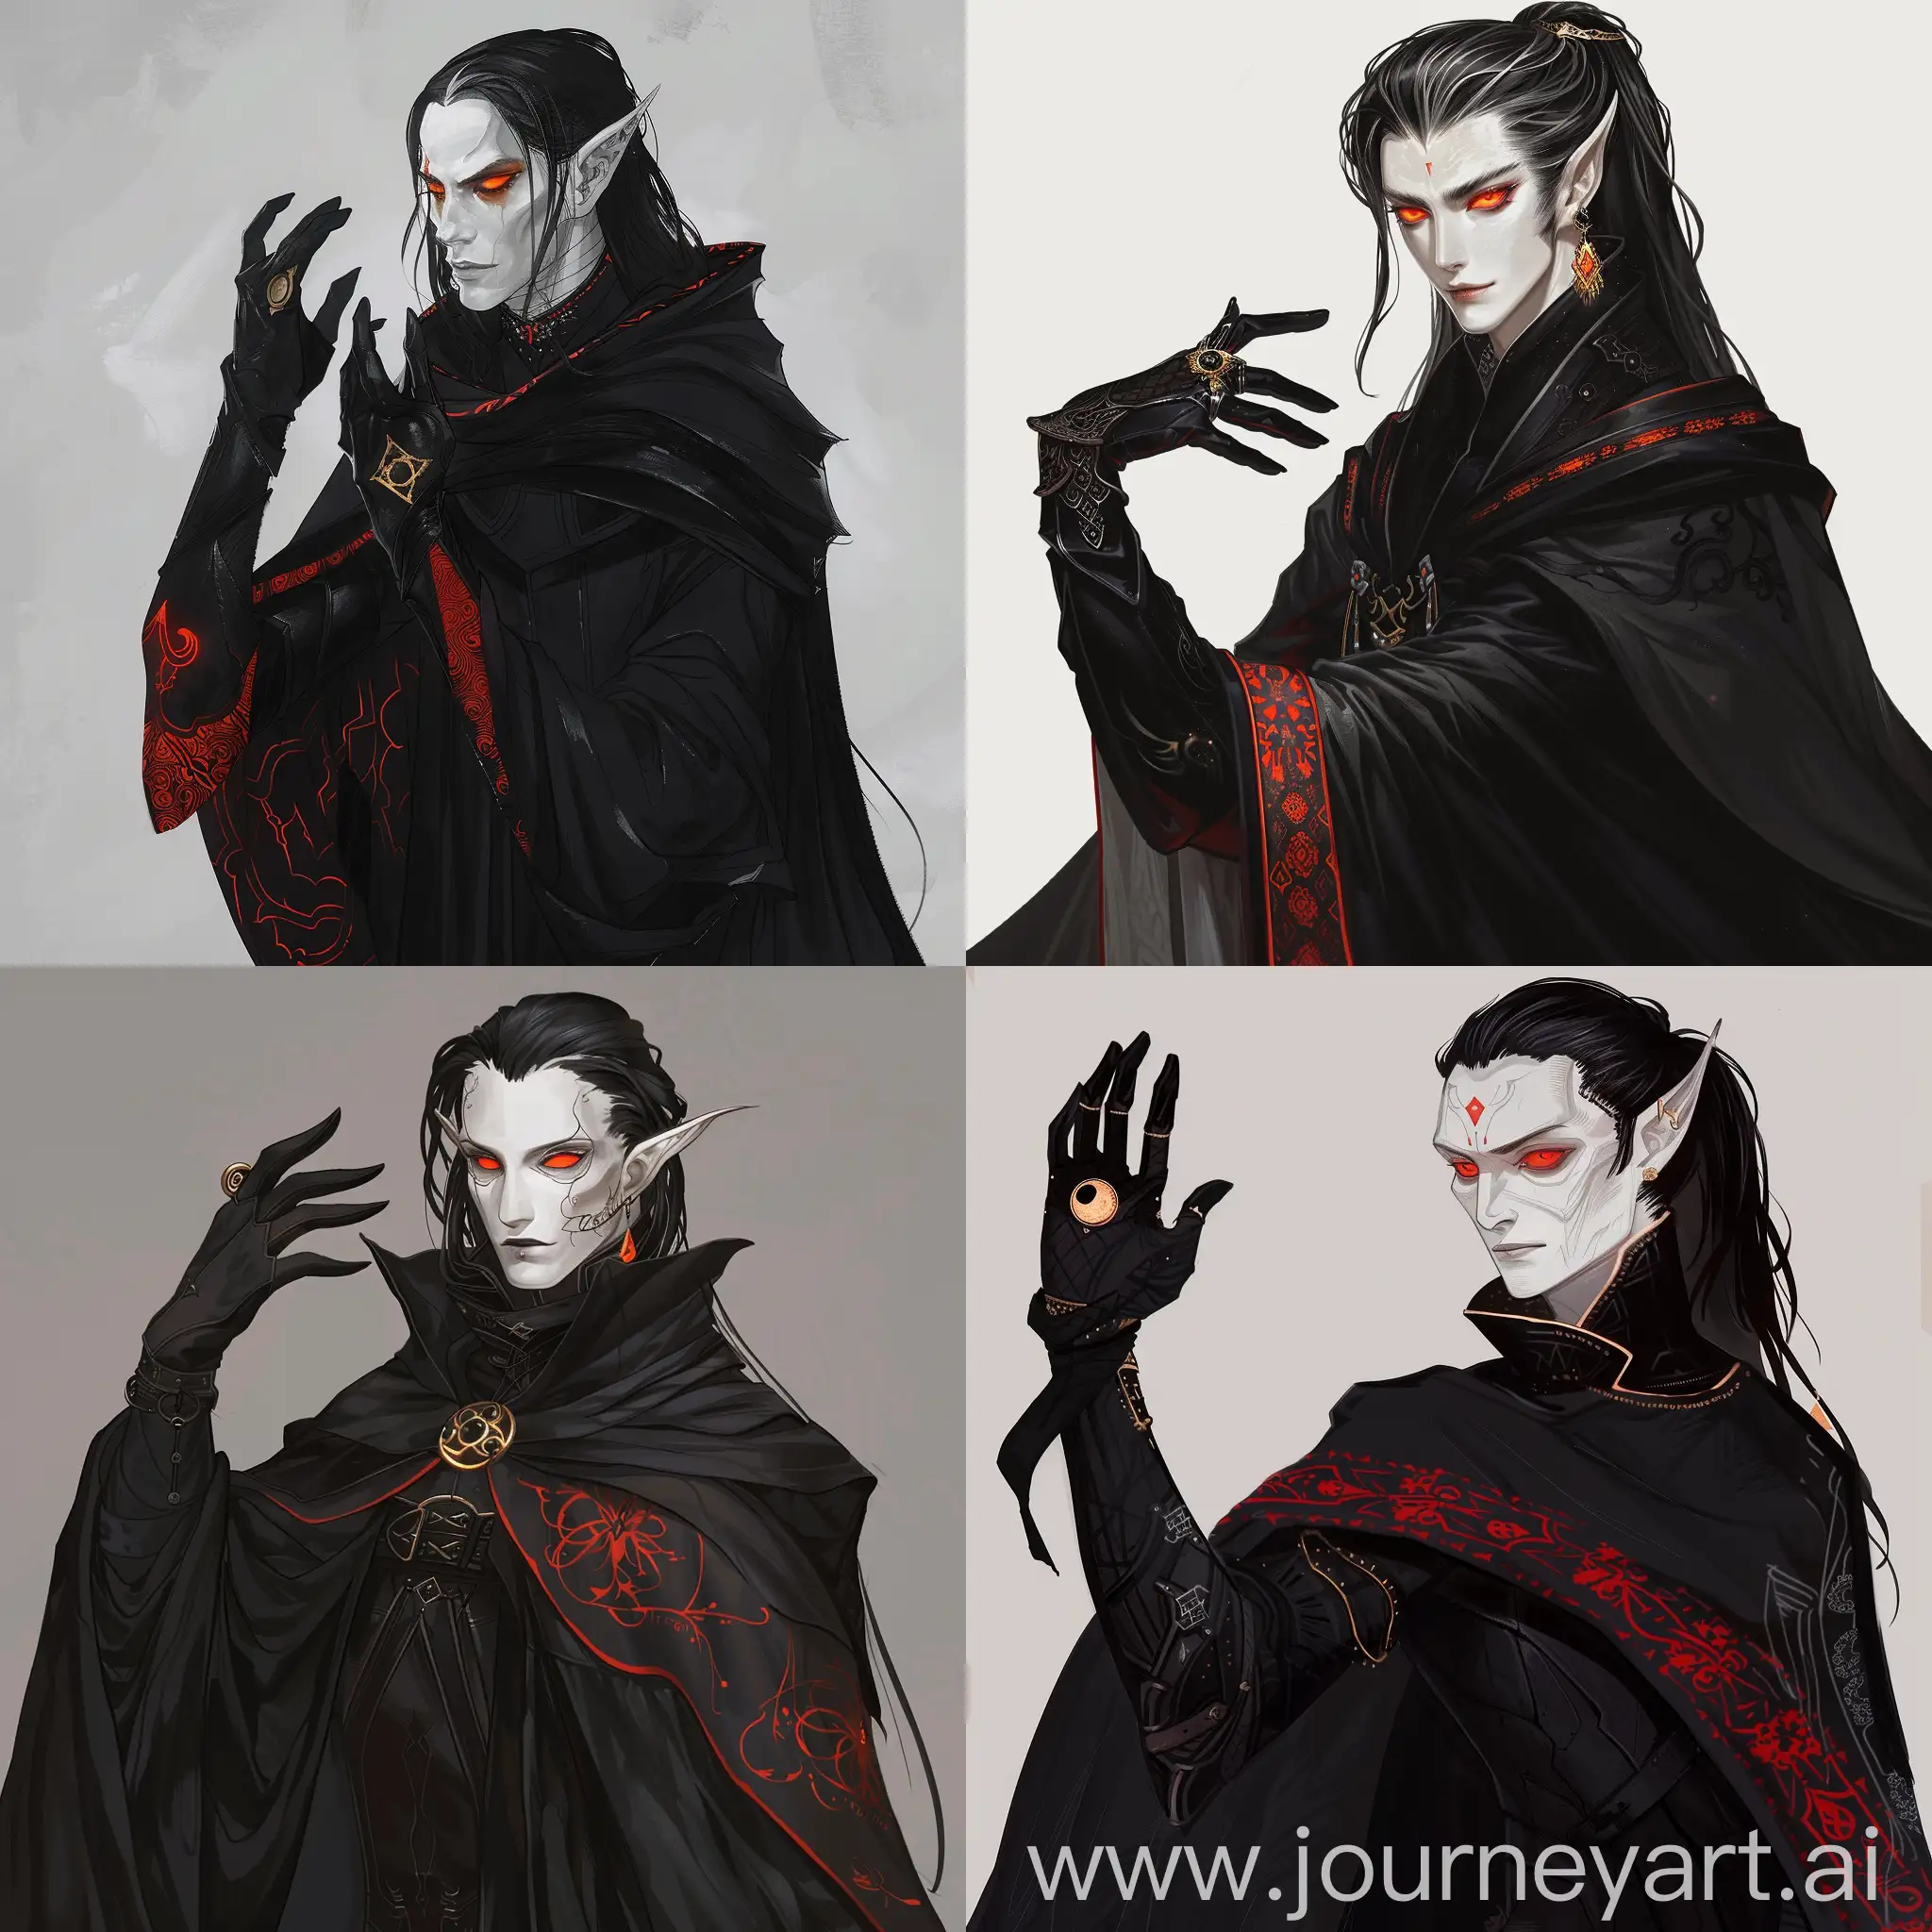 dnd white pale skin with orange eyes,long black hair swept back,black cape with black clothes and red patterns on his clothes,wearing a black glove with a golden ring on glove.